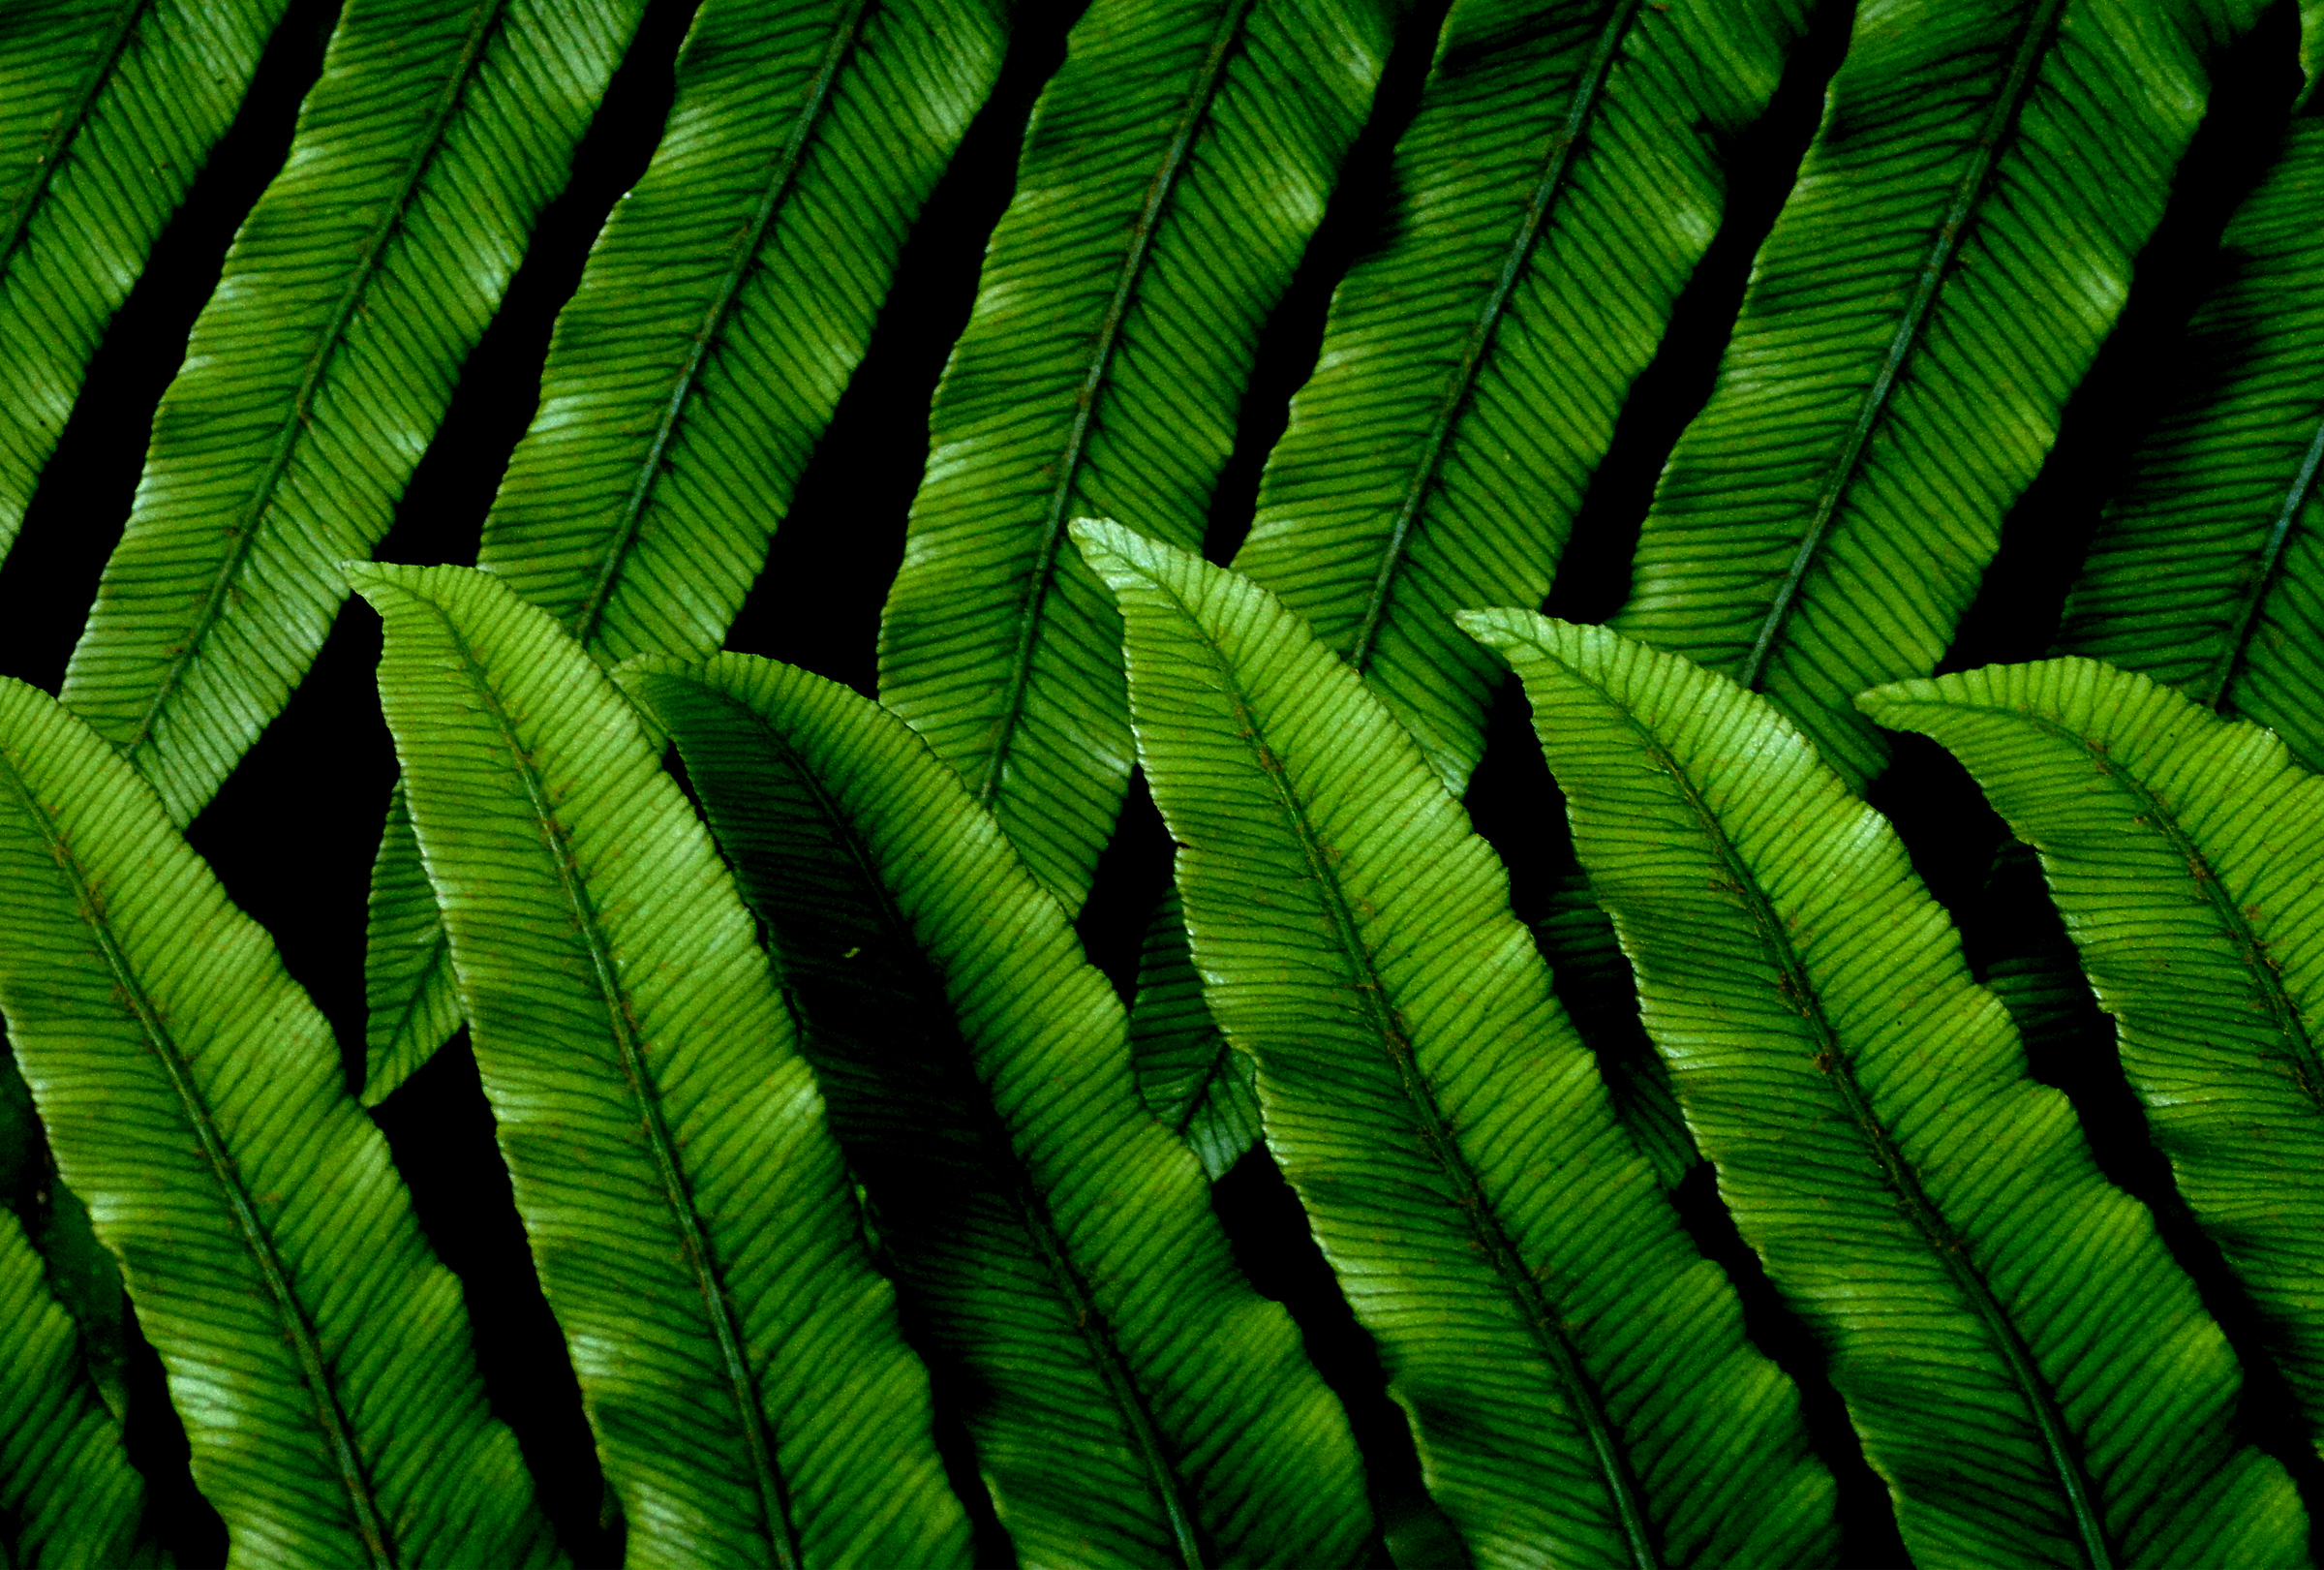 Green Leaves Pattern Image & Photo (Free Trial)